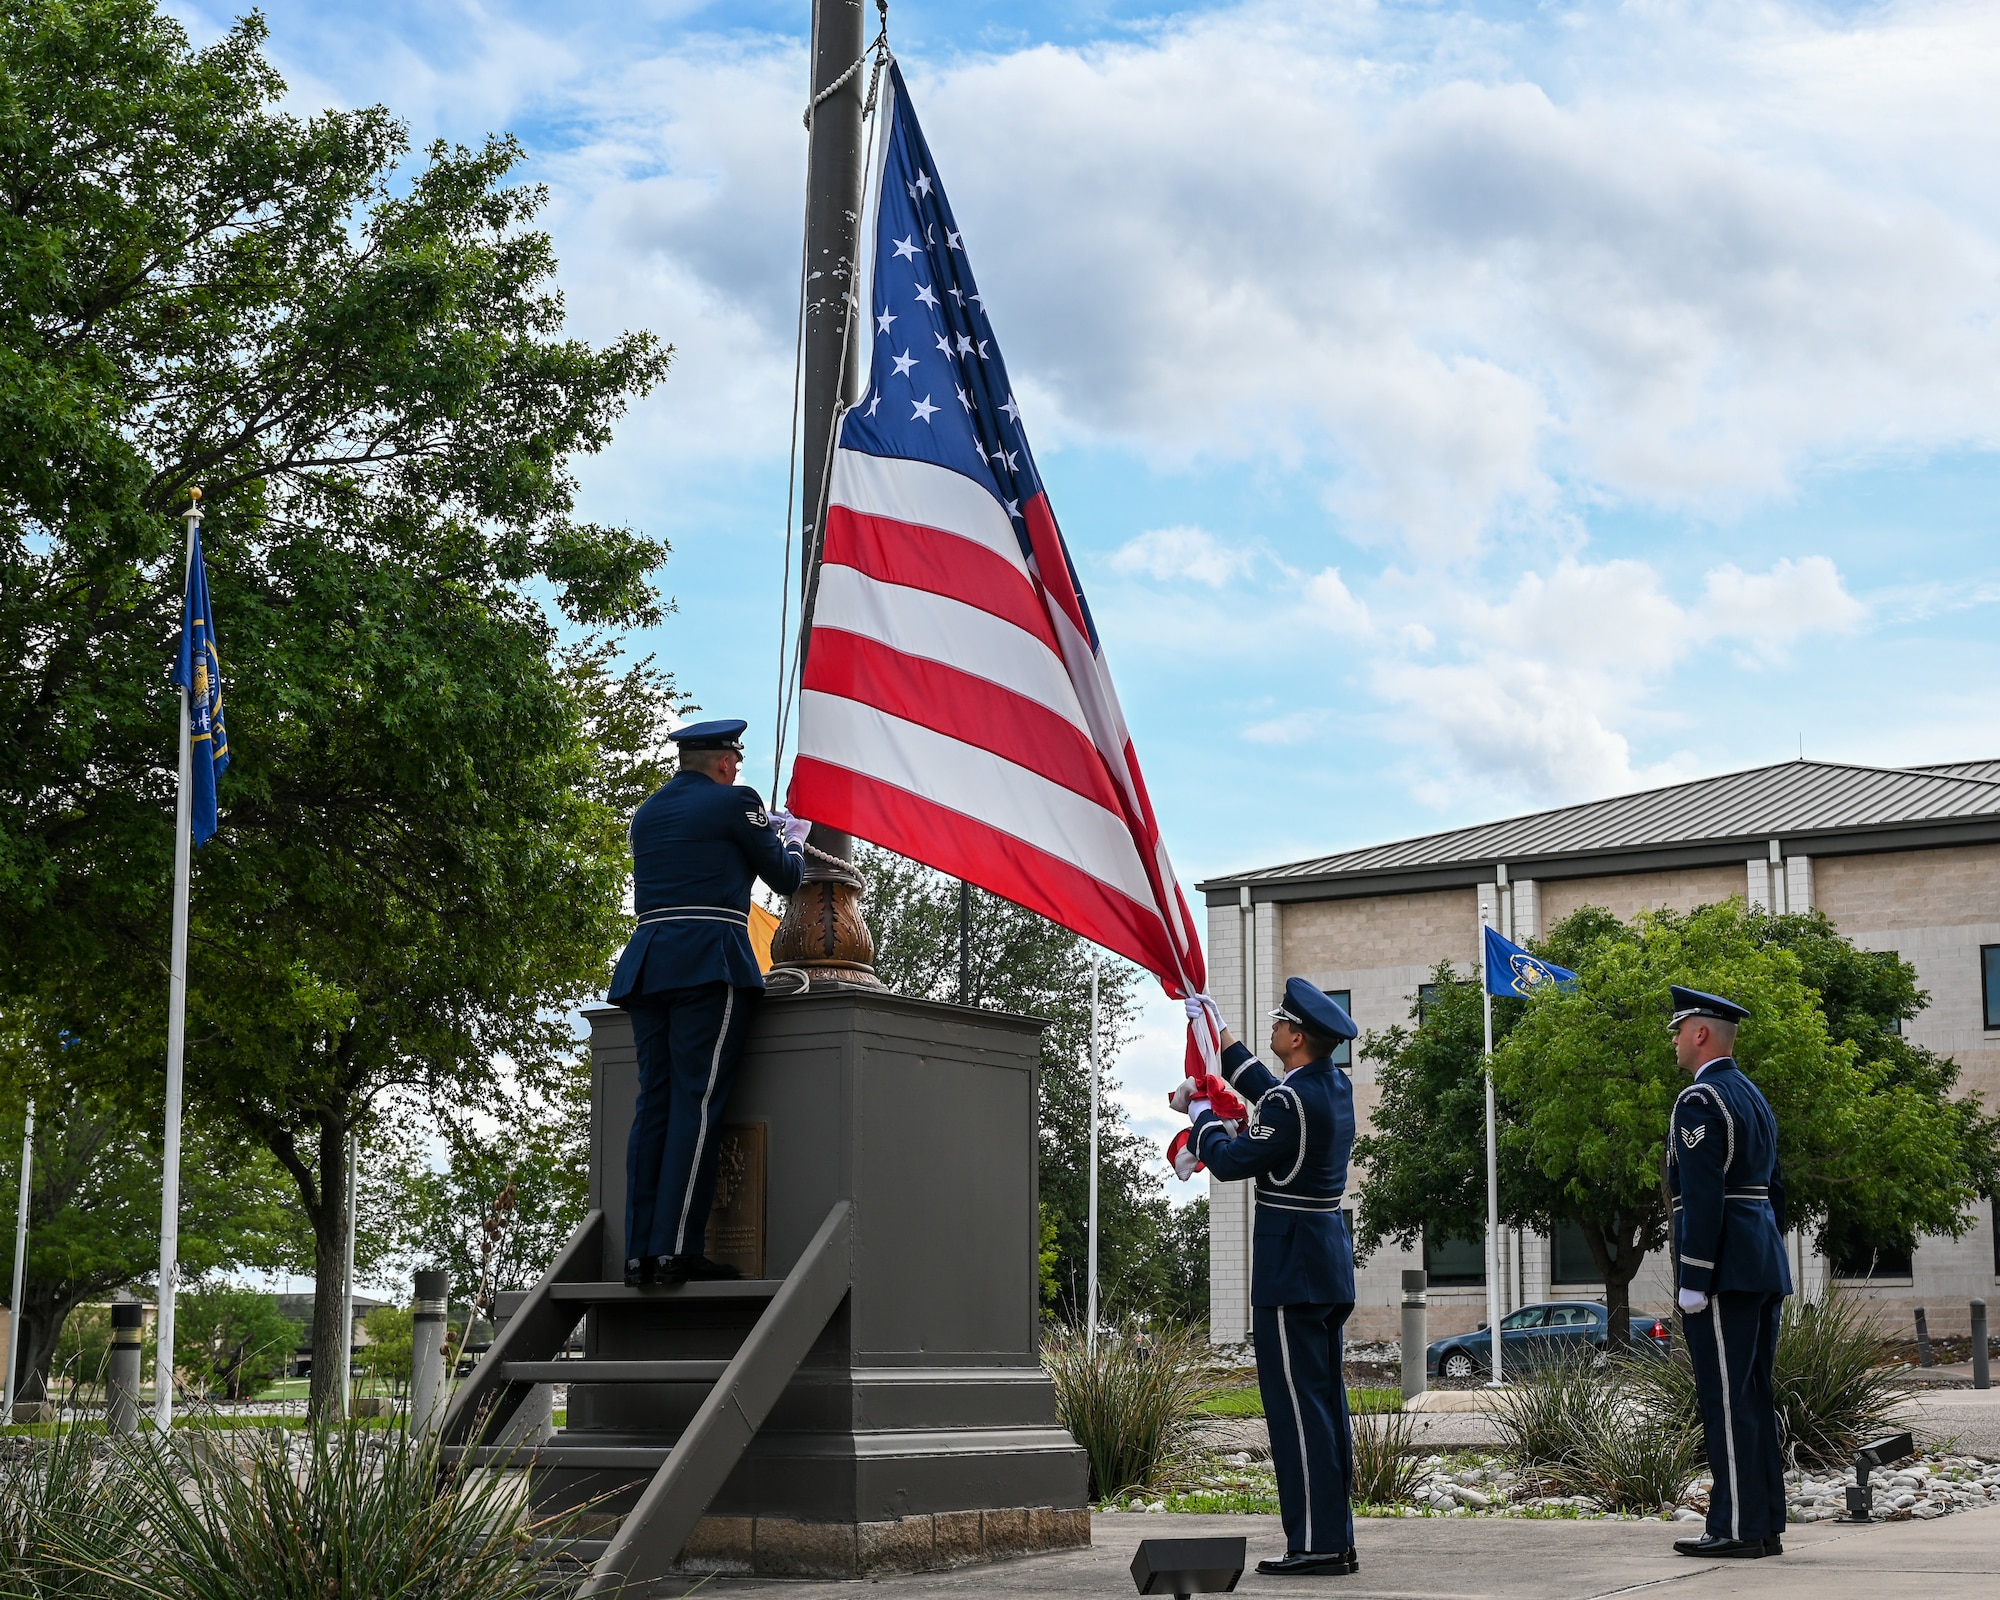 U.S. Air Force Staff Sgt. Jesus Vega German, 47th Force Support Squadron base honor guard program manager, left, lowers the American flag to fellow honor guard members during a retreat ceremony at Laughlin Air Force Base, Texas, on Sept. 2, 2022. The 85th FTS celebrated its 50th anniversary at Laughlin which ended with a retreat ceremony. (U.S. Air Force photo by Airman 1st Class Keira Rossman)